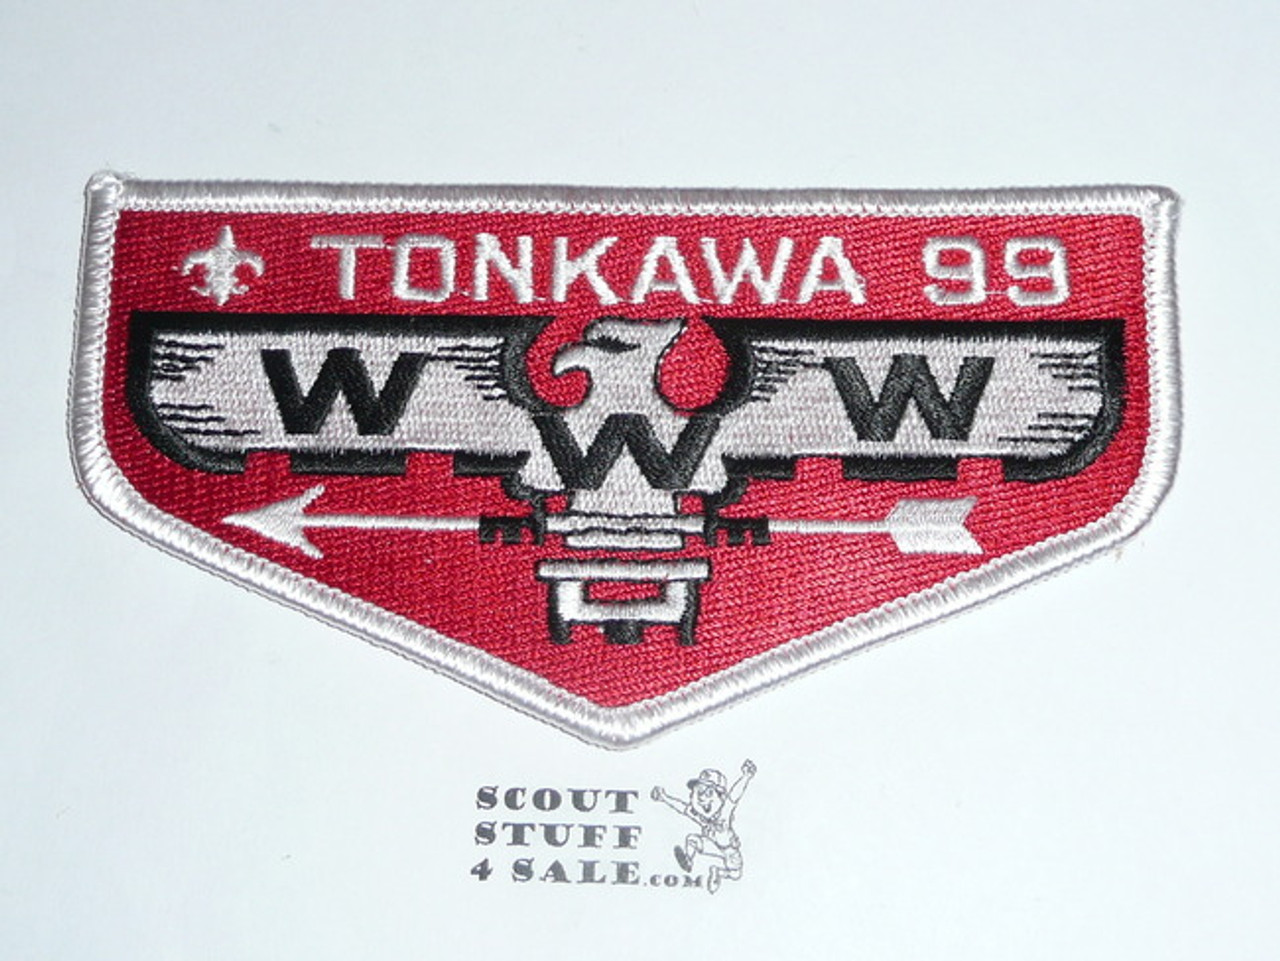 Order of the Arrow Lodge #99 Tonkawa Flap Patch from the Last Ten Years #2